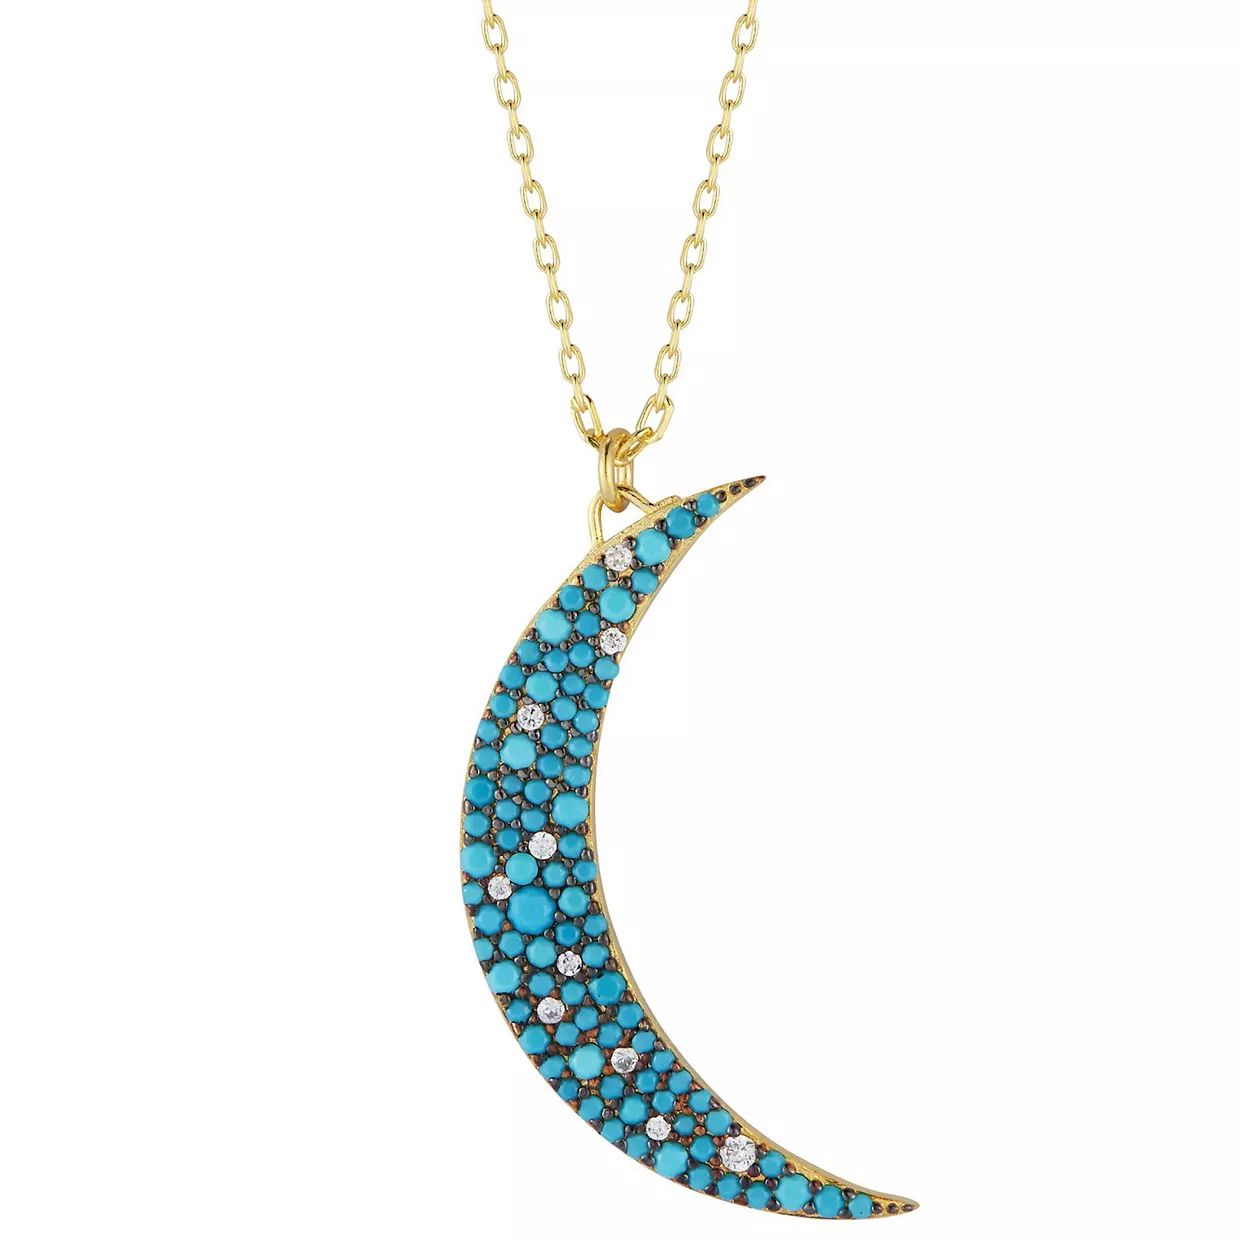 Sunkissed Sterling Cubic Zirconia & Turquoise Moon Pendant Necklace | Kohl's